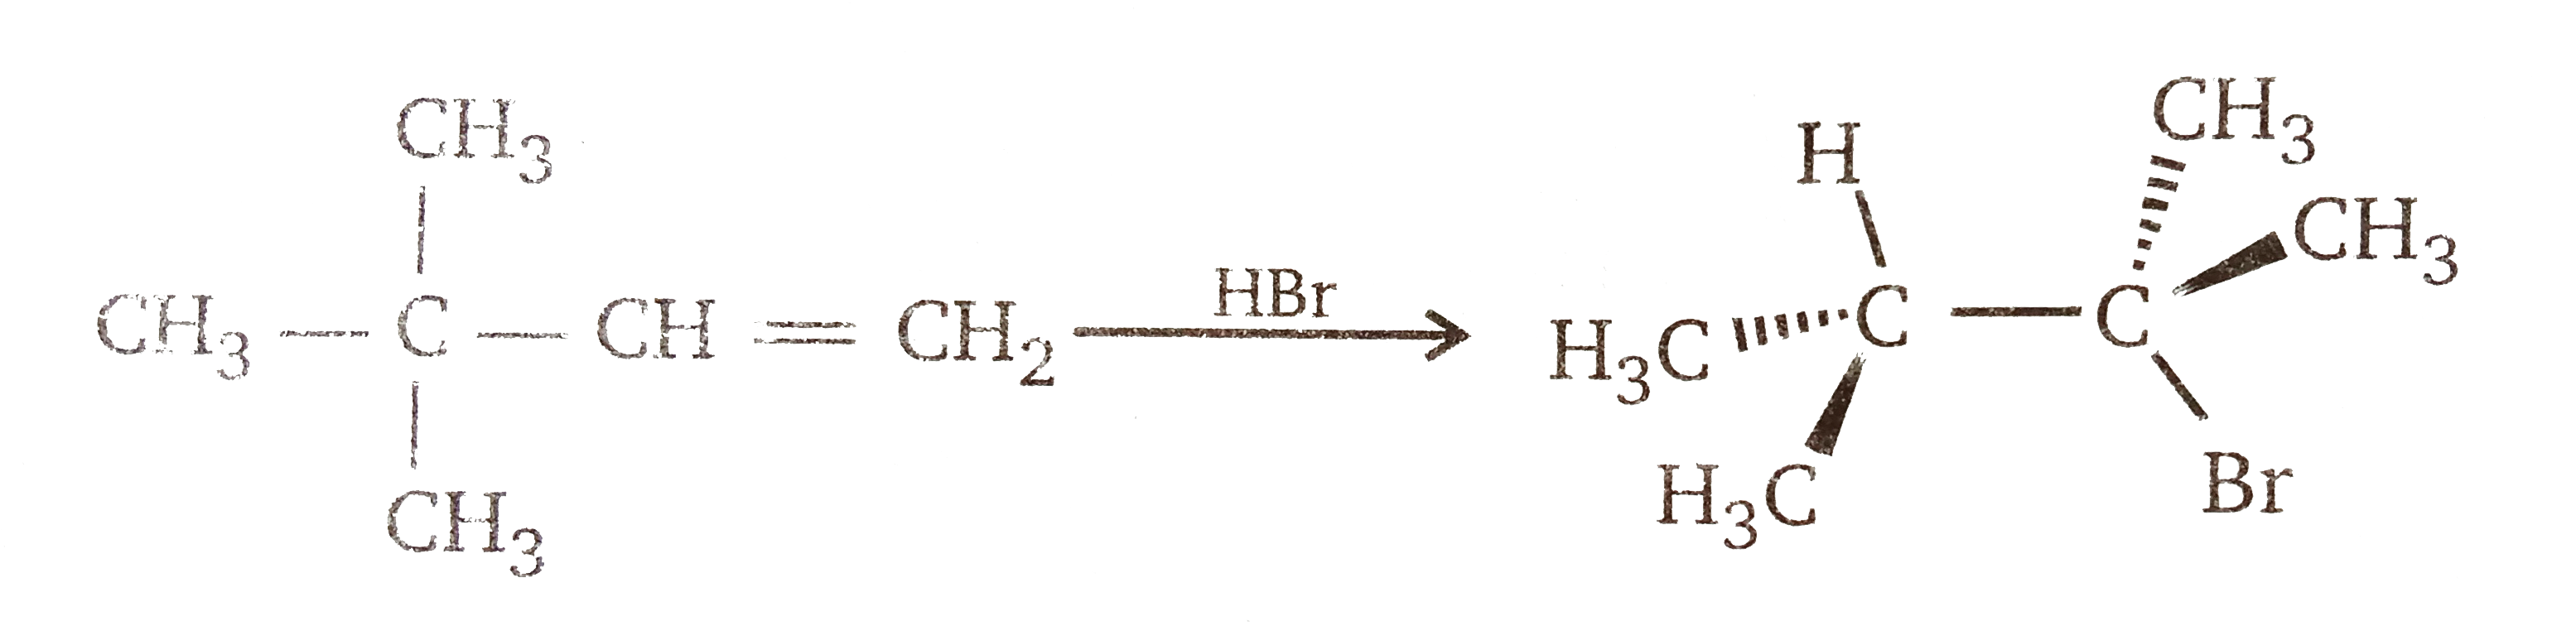 Consider the addition of HBr to 3,3-Dimethyl-1-butene shown below. What is the best mechanistic explanation for the formation of the observed product?